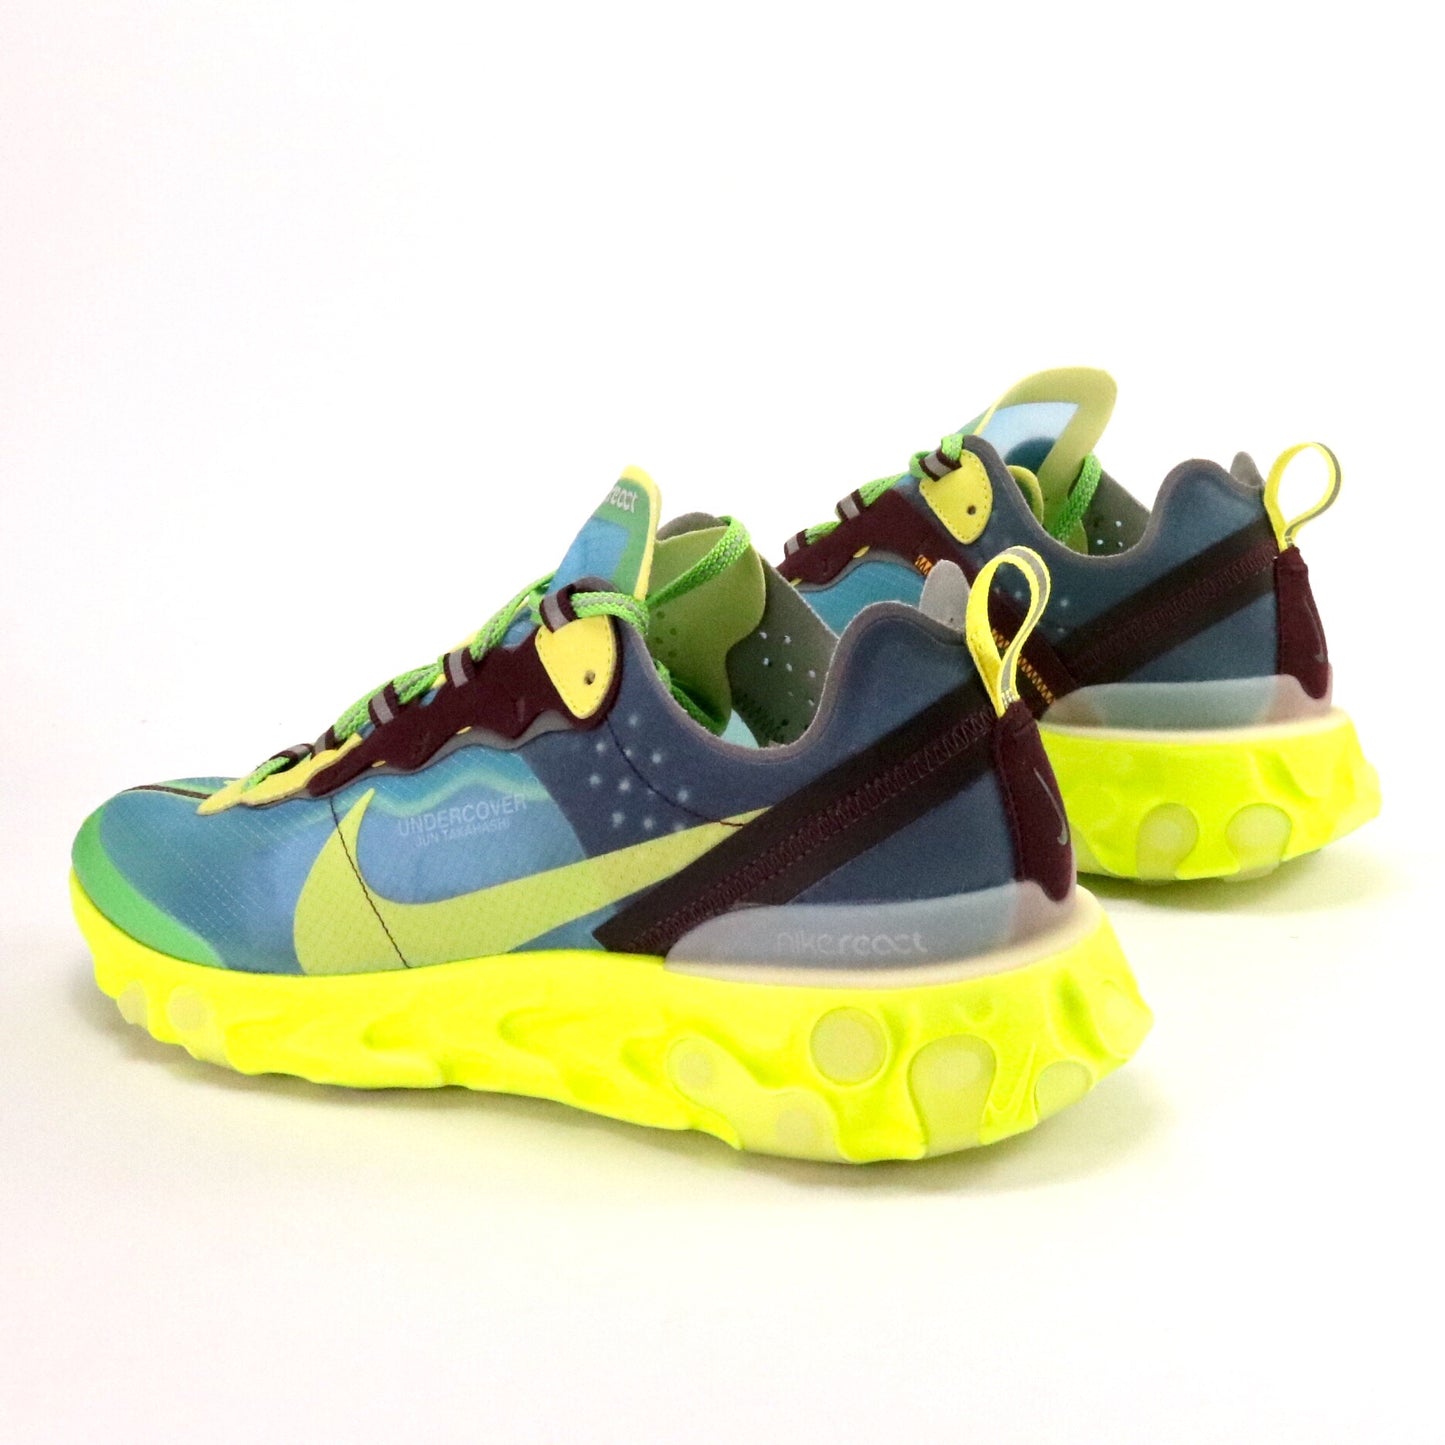 Nike React Element 87 x Undercover Lakeside Blue Electric Yellow